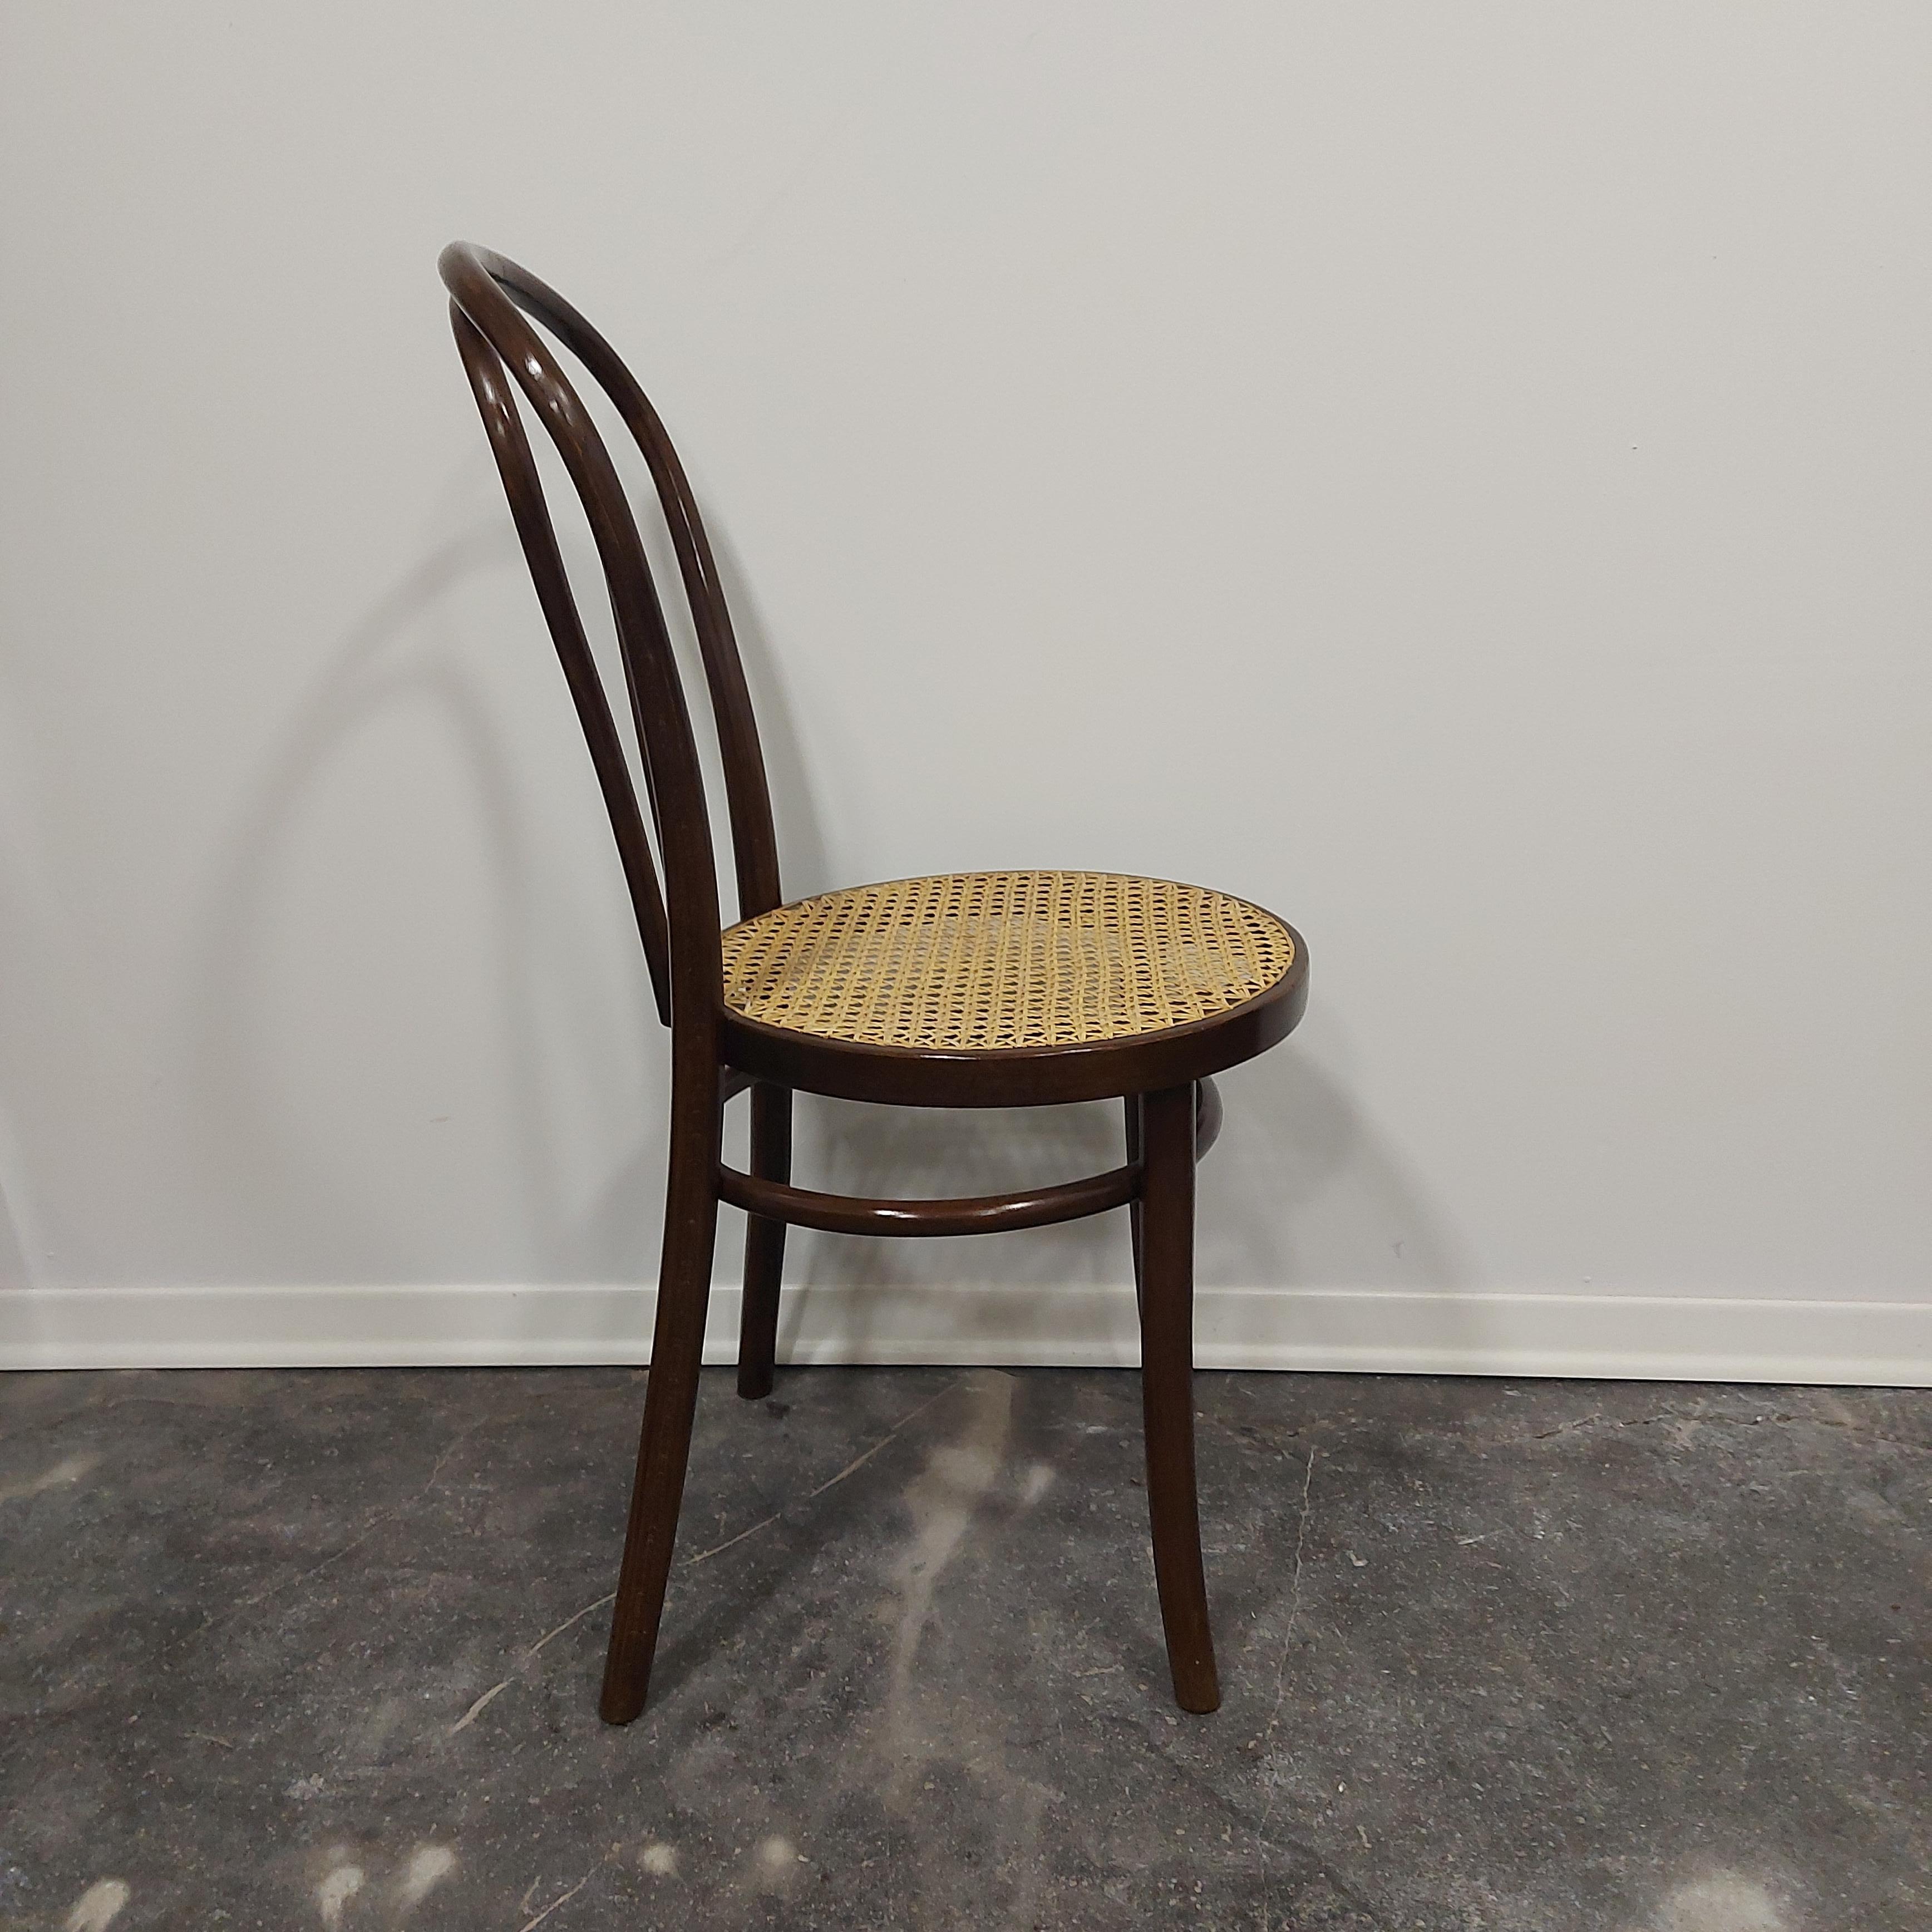 Mid-20th Century Thonet N.18 Beech and Vienna Straw Chair 1960s For Sale